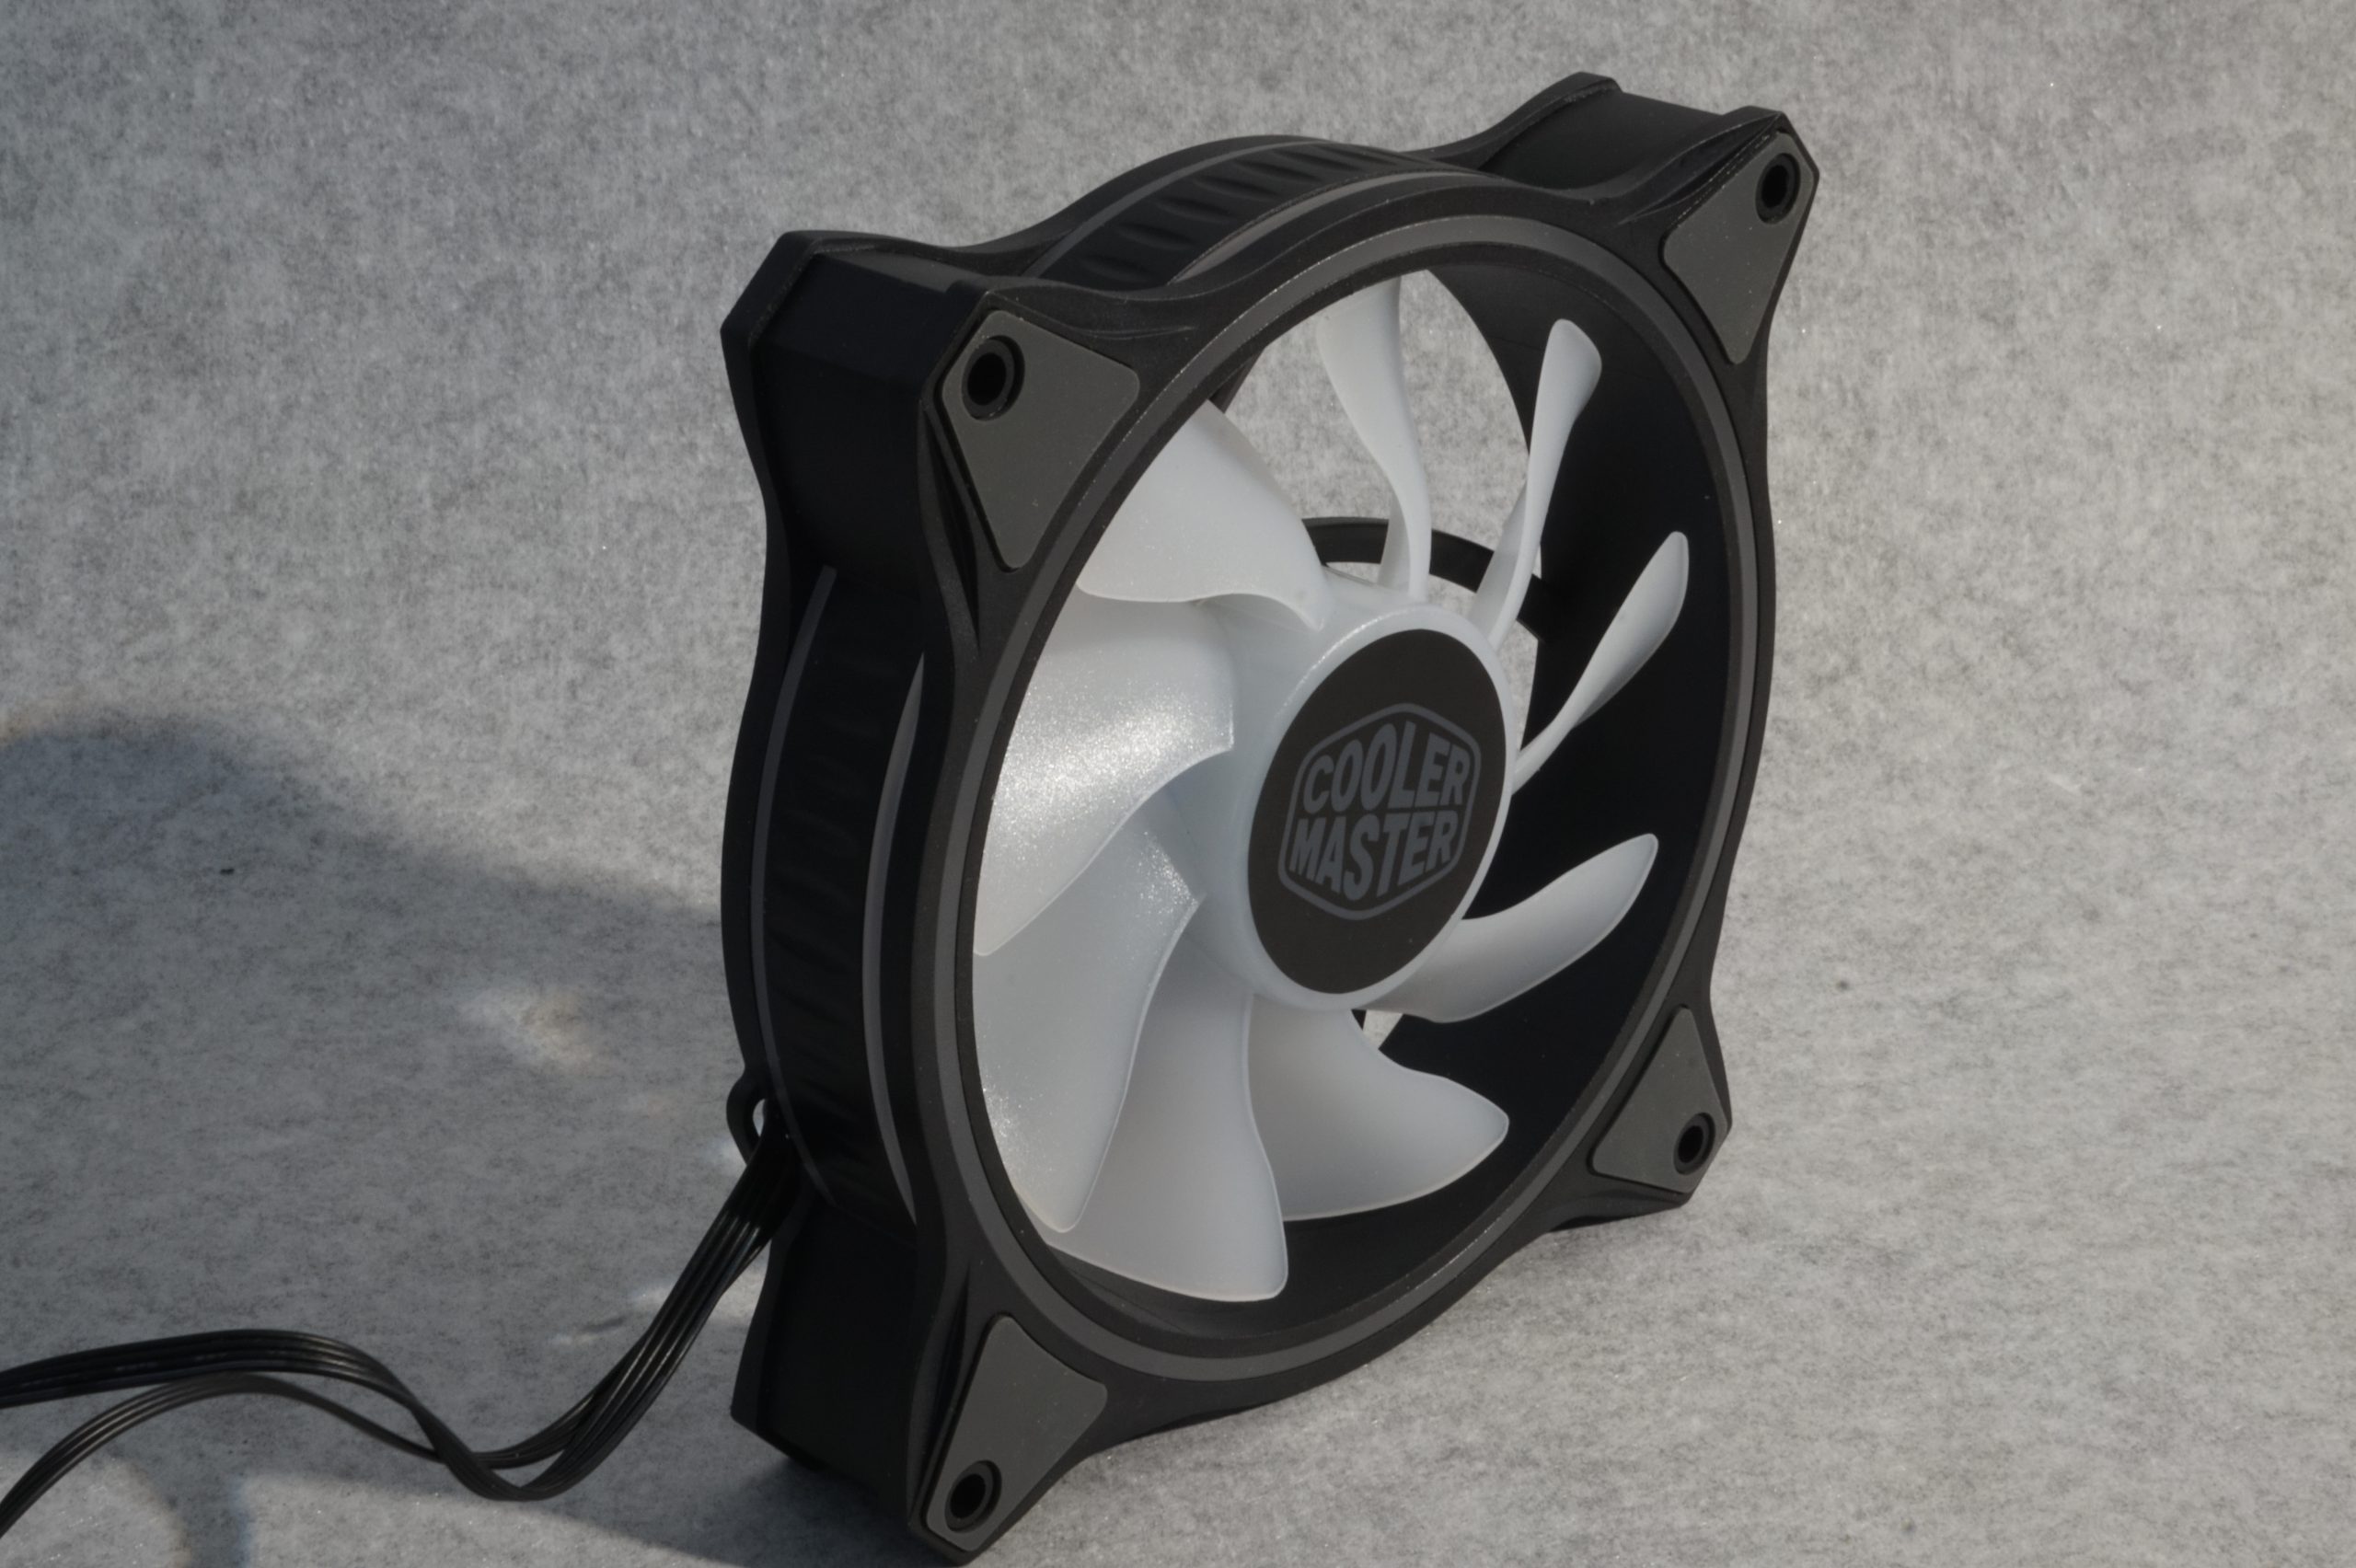 IgorsLab] Review with 6 case and radiator fans from be quiet